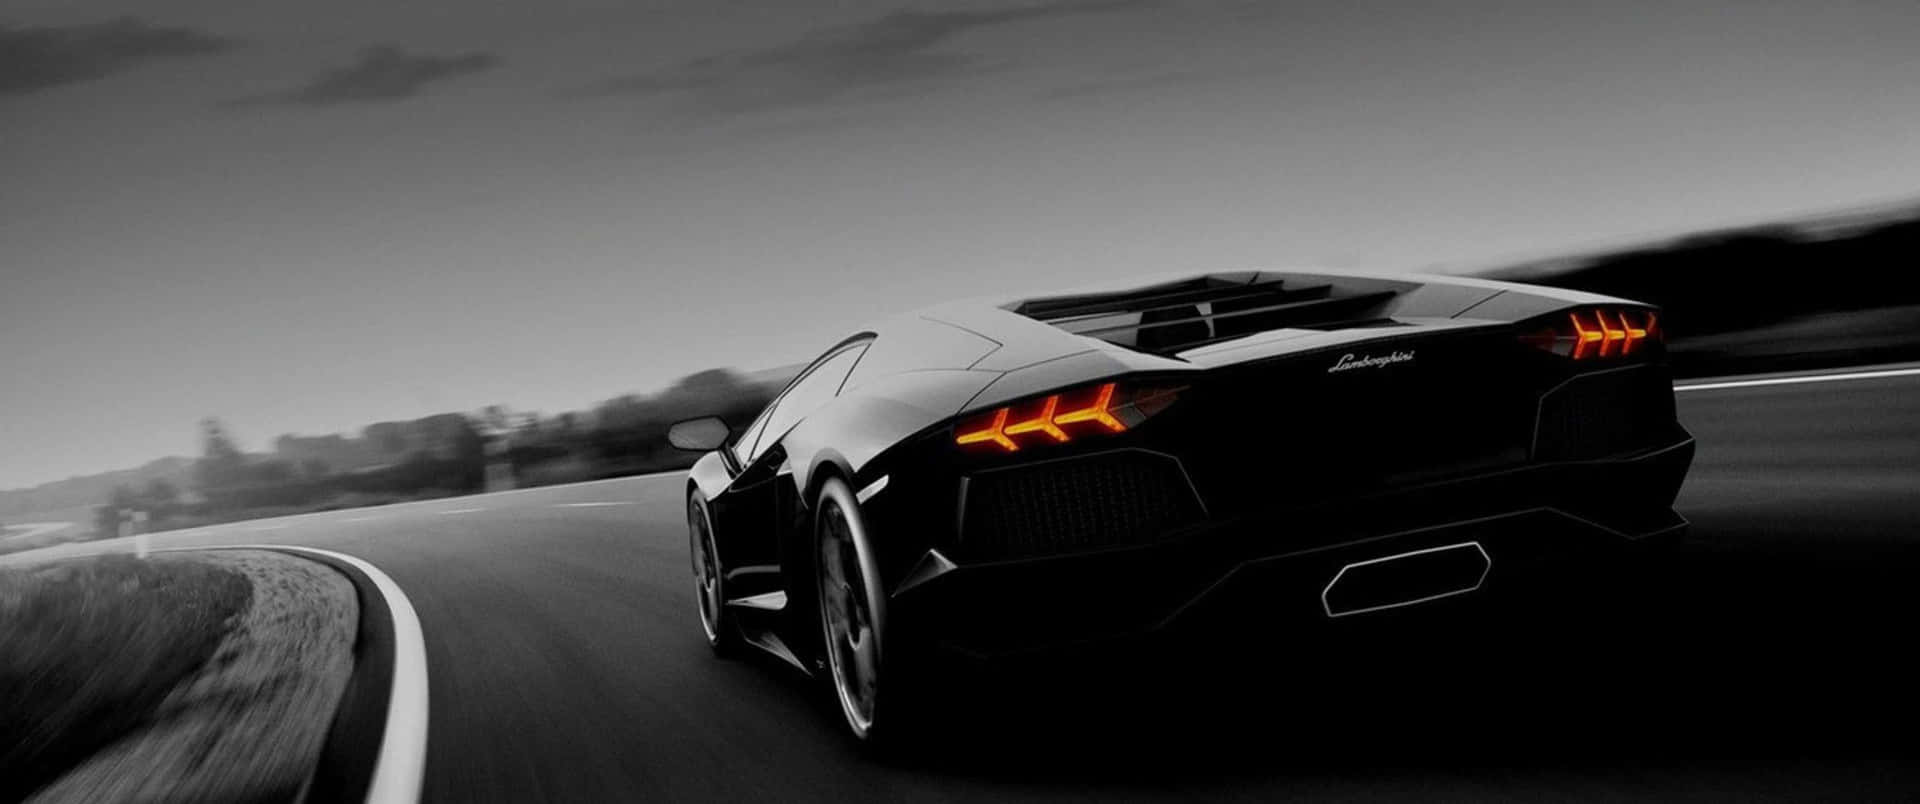 A Black And White Image Of A Sports Car Driving Down The Road